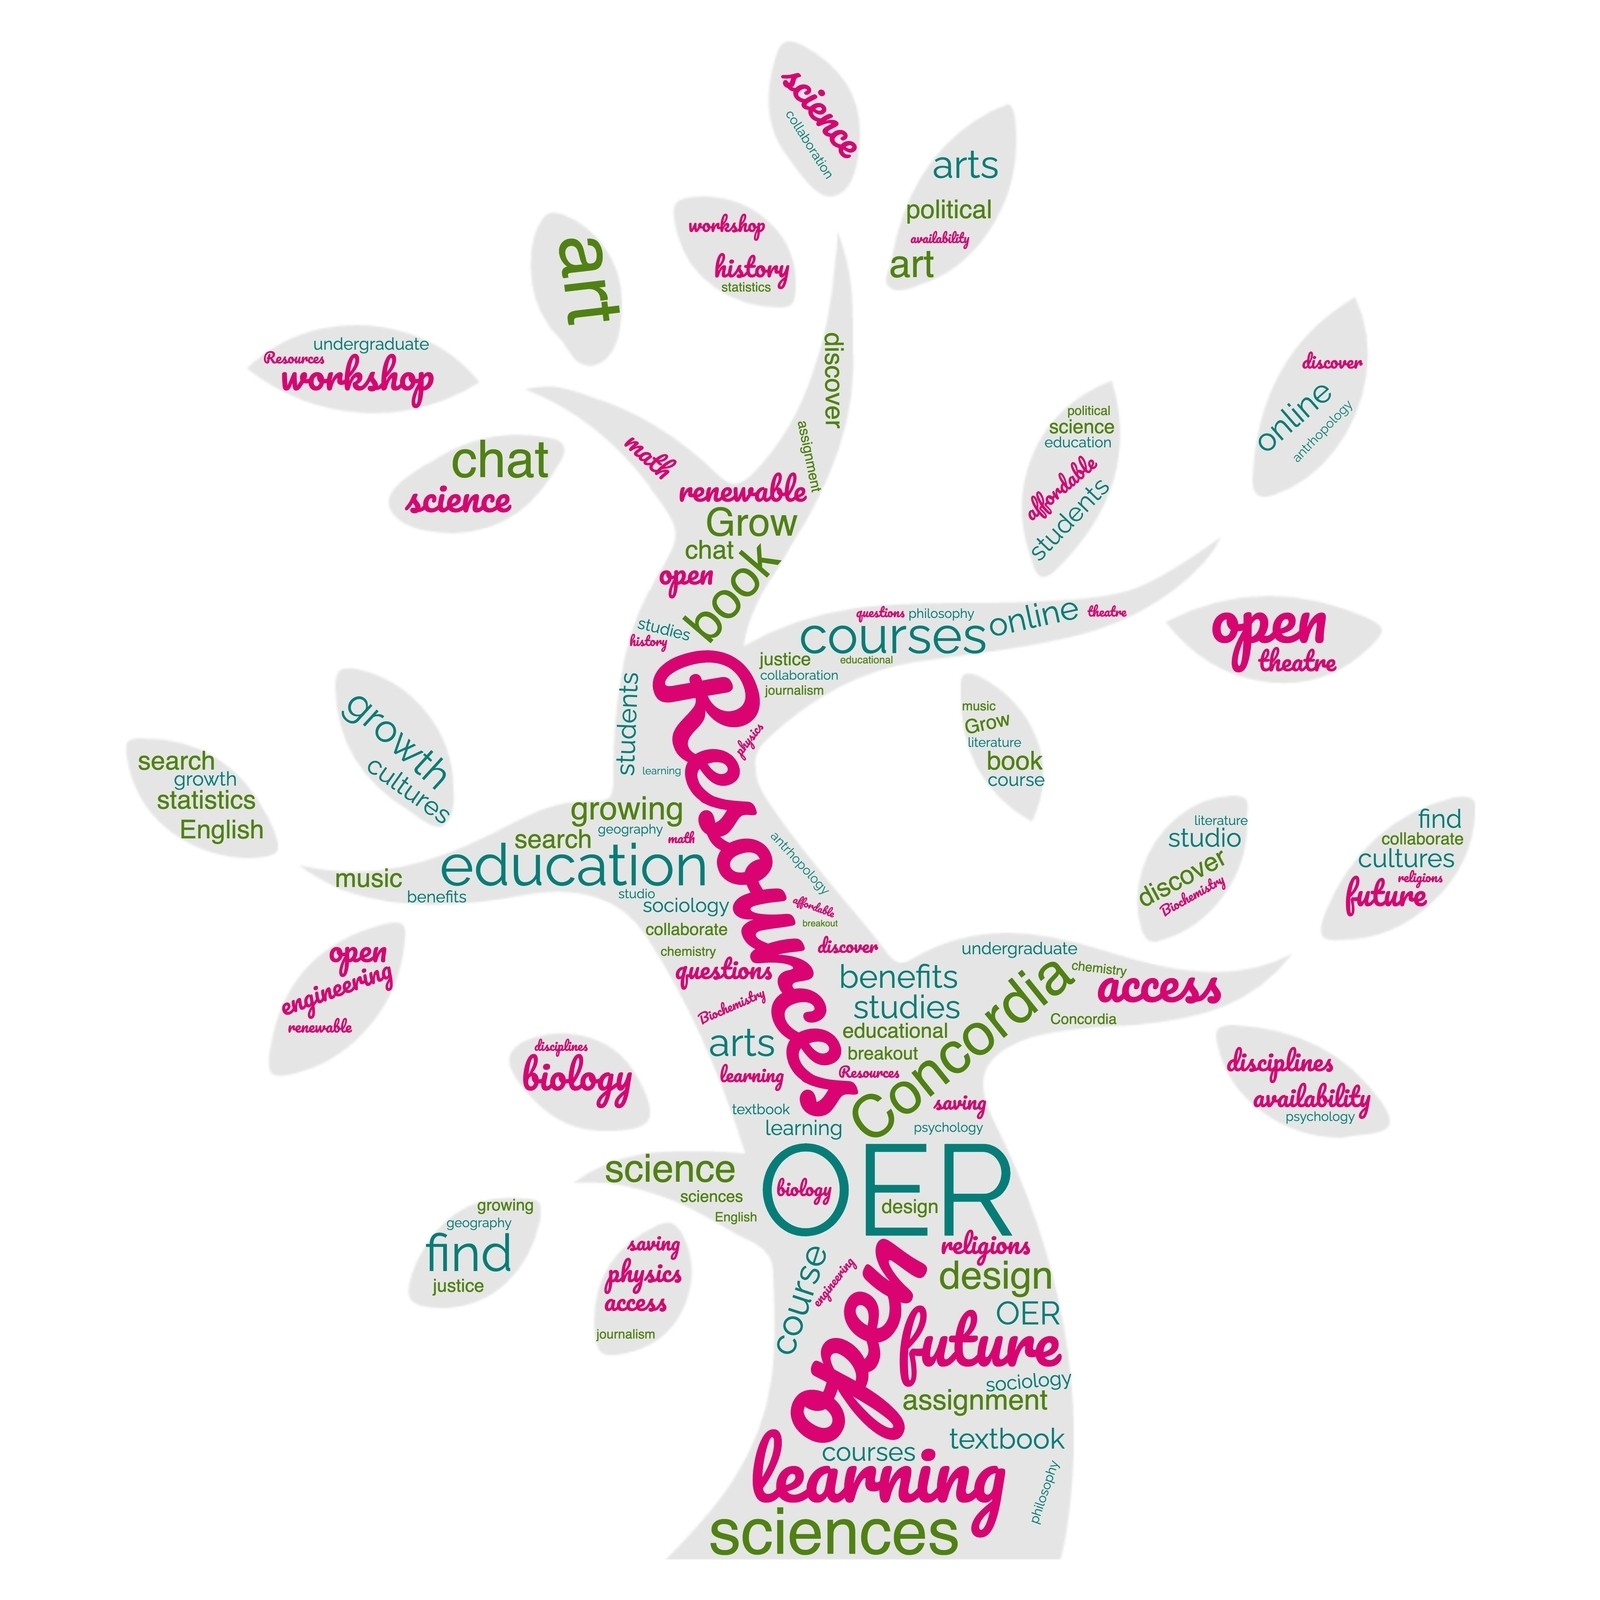 A word cloud in the shape of a tree